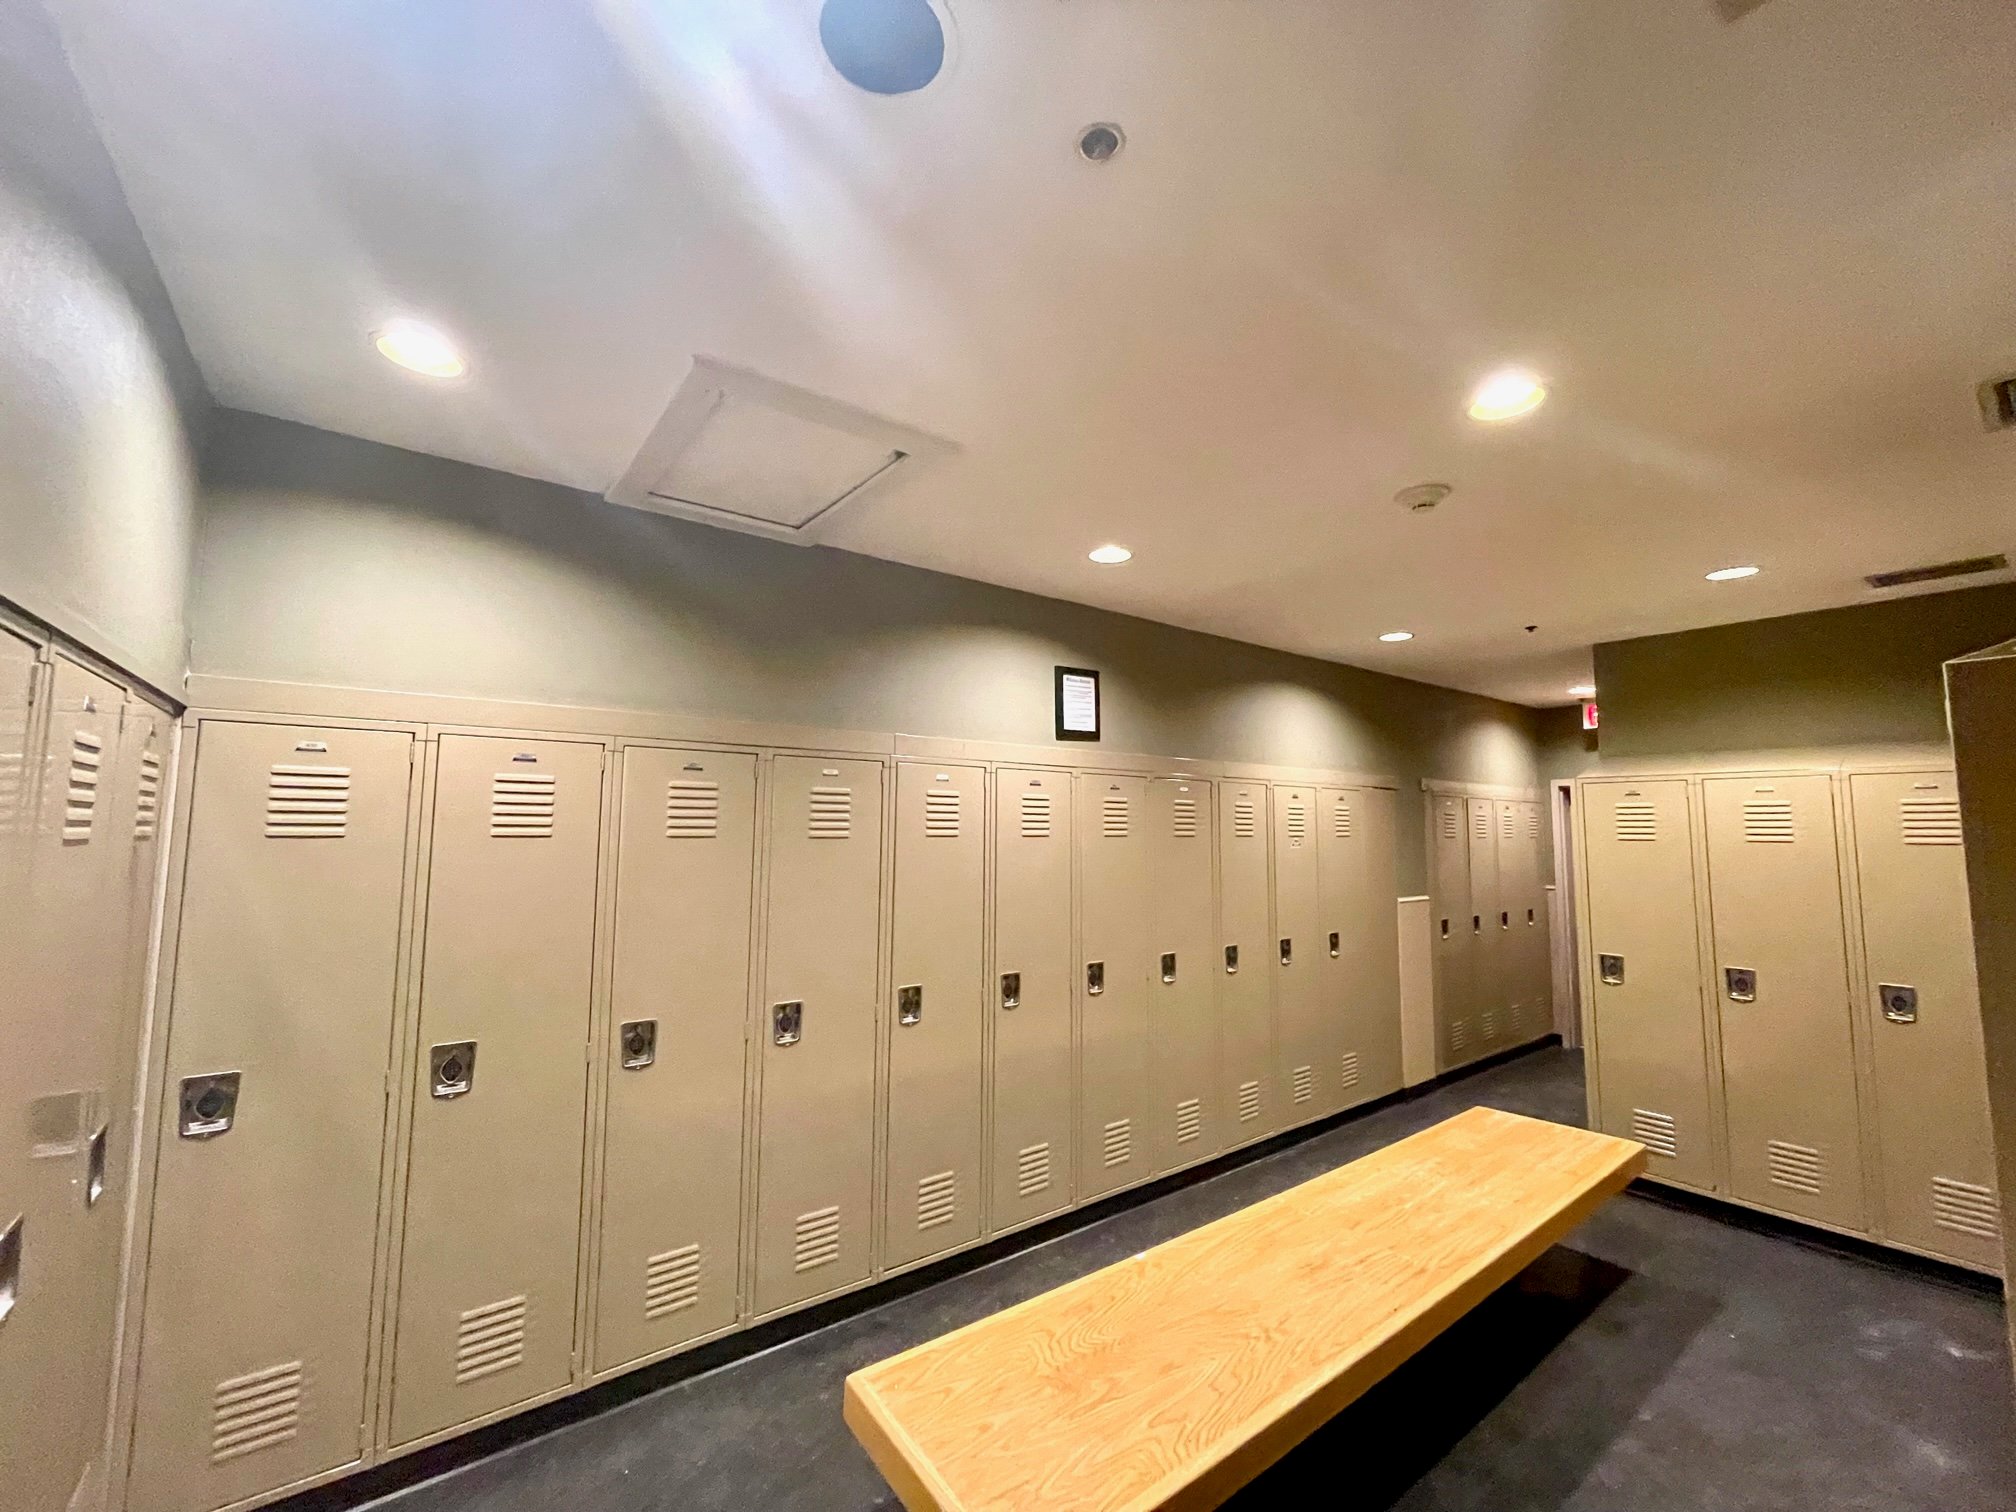 Ski lockers for guest use